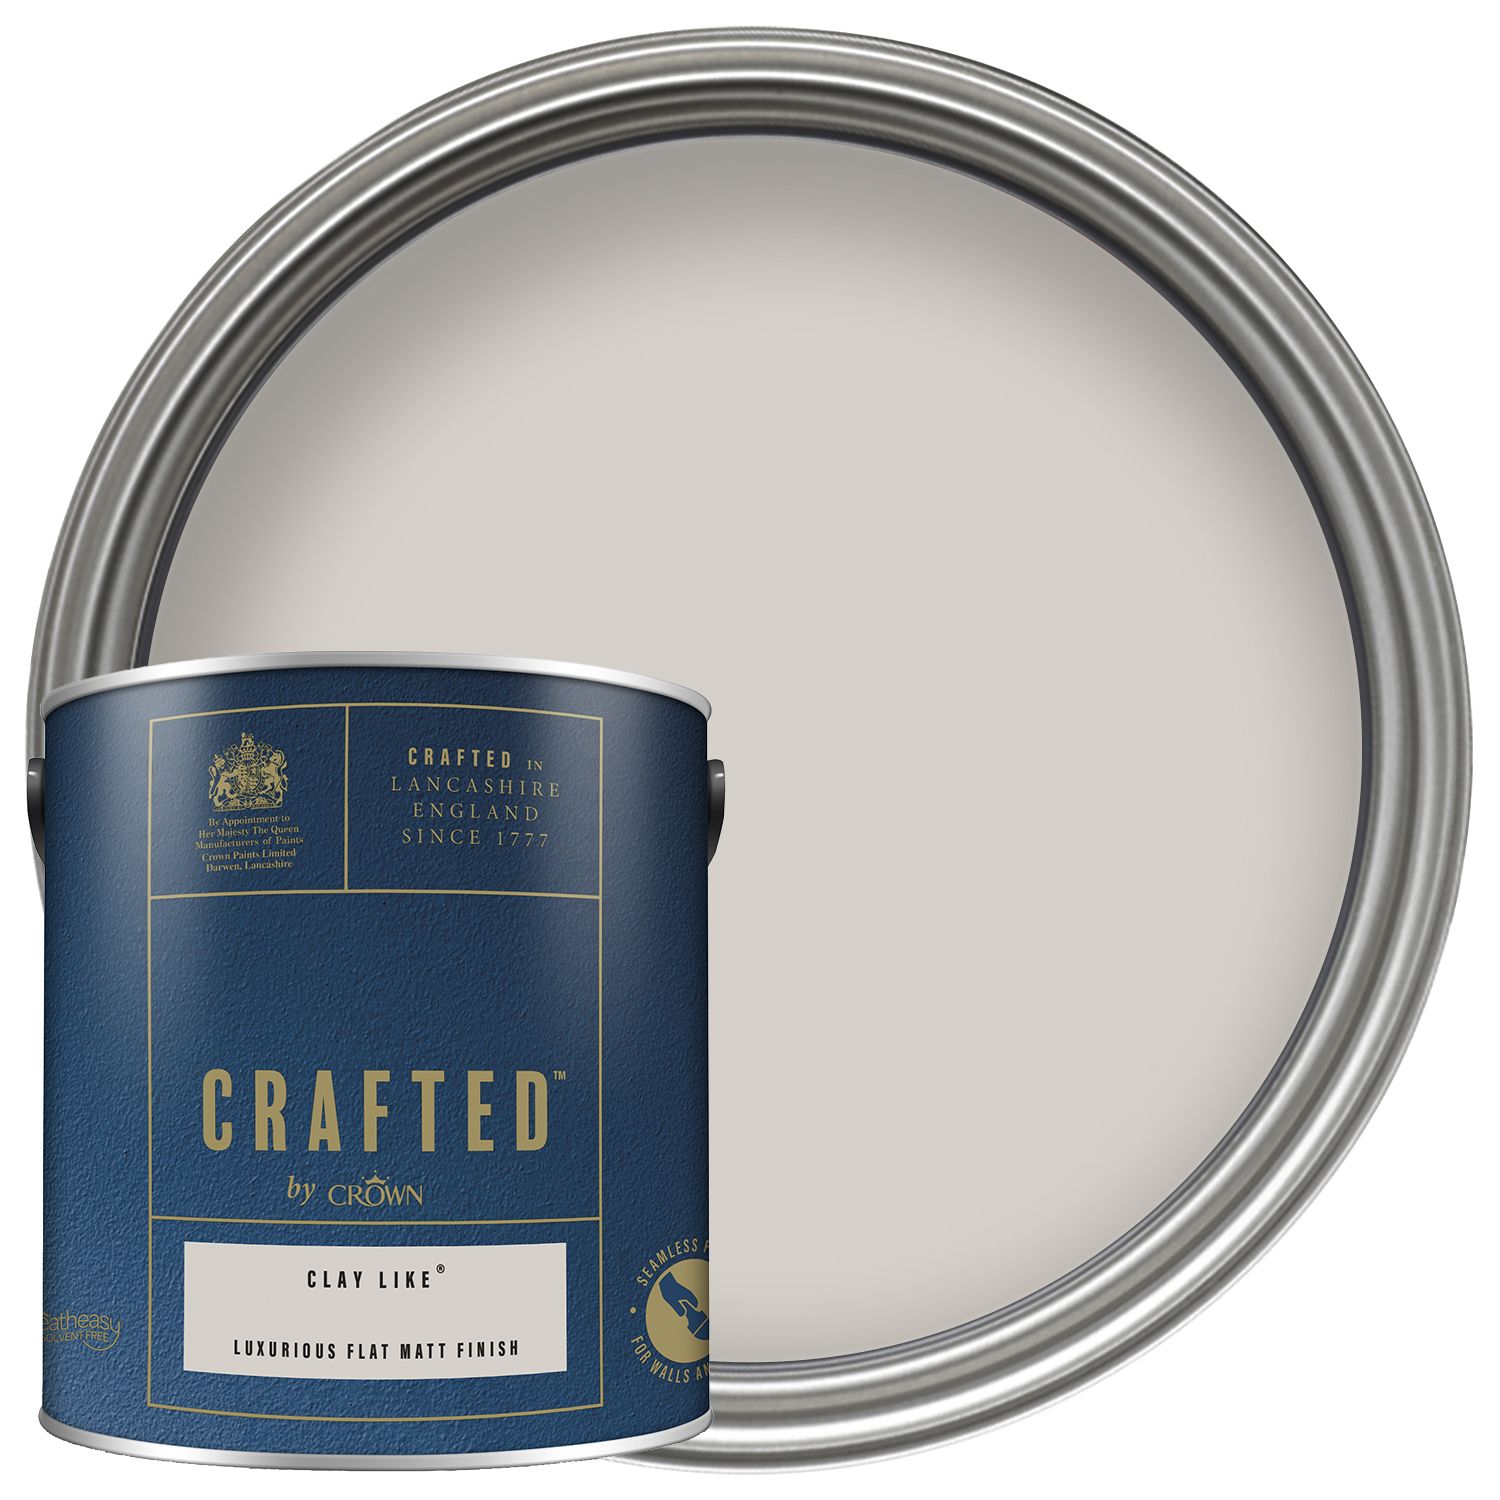 Image of CRAFTED™ by Crown Flat Matt Emulsion Interior Paint - Clay Like™ - 2.5L